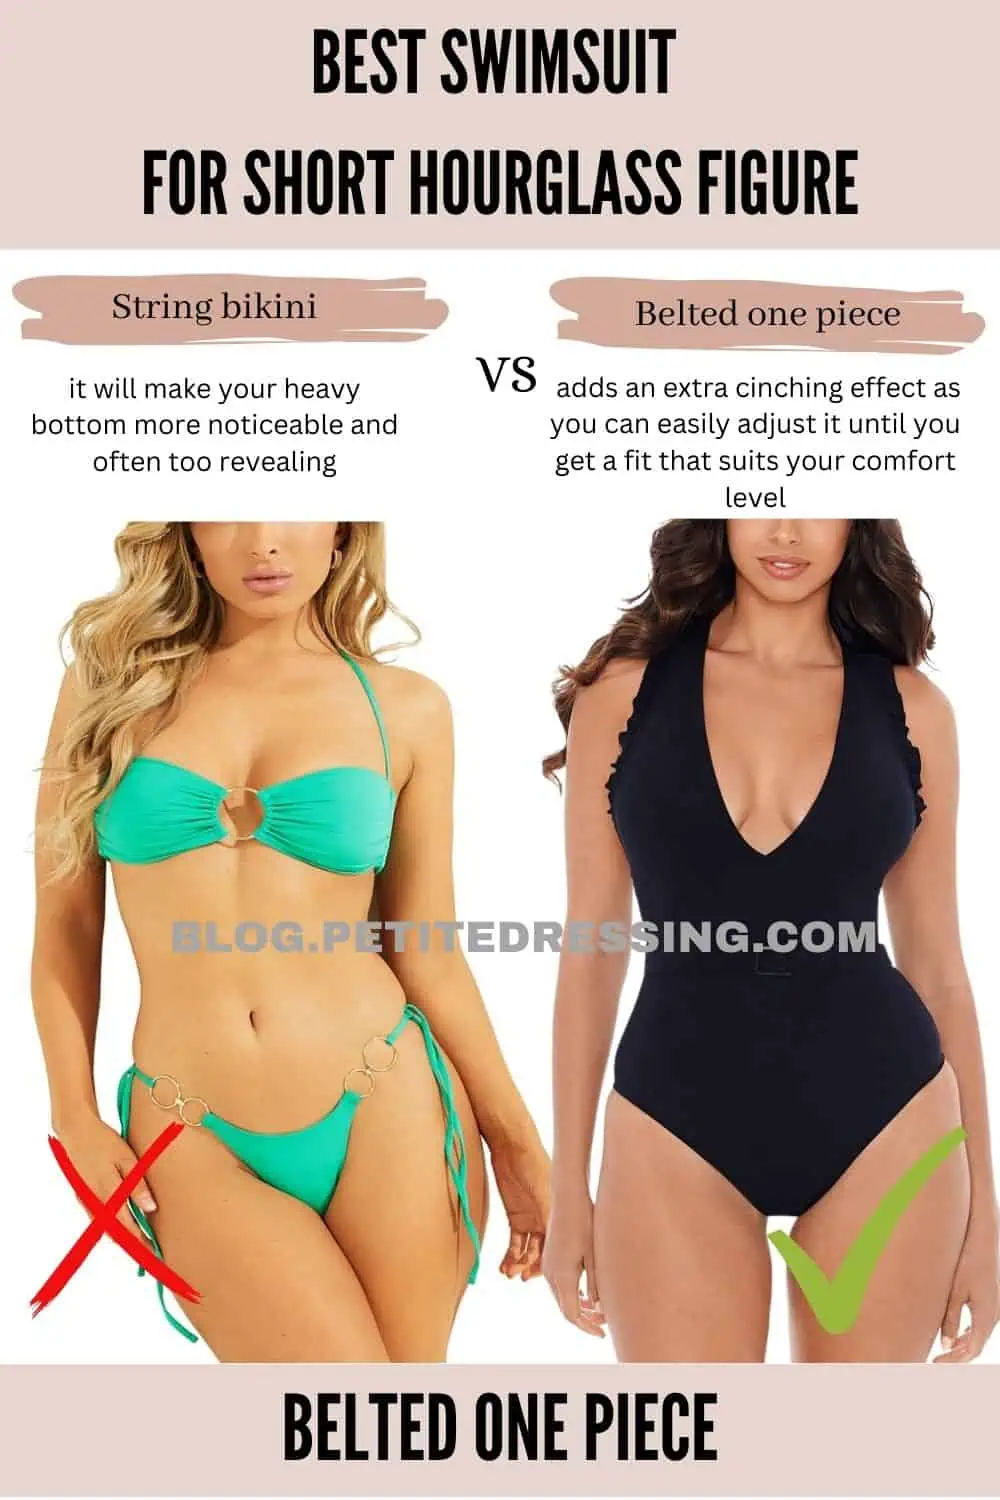 Best Swimsuit For Petite Hourglass